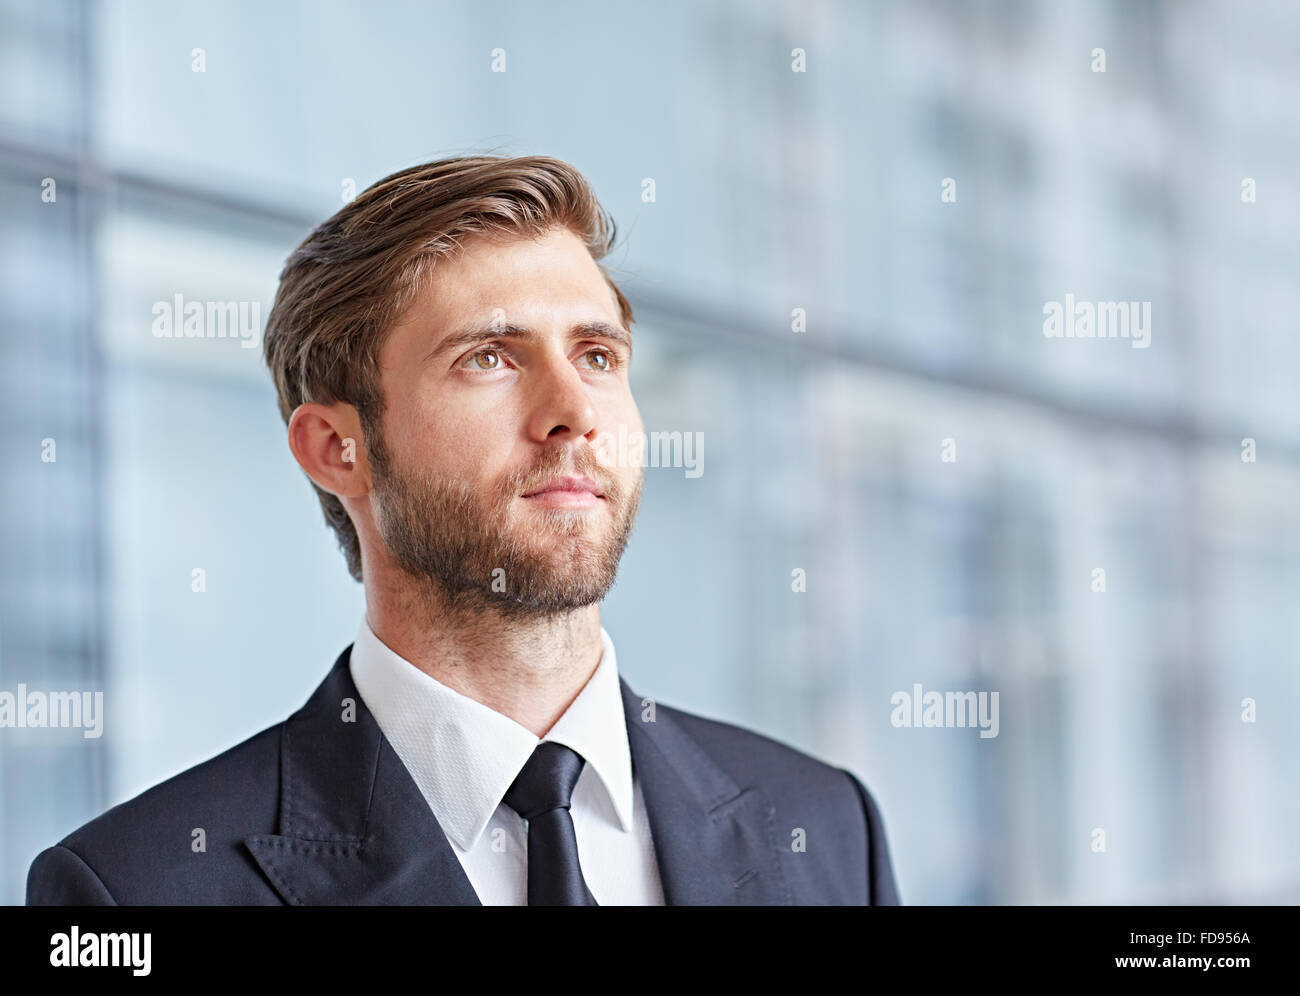 Corporate futures are looking bright Stock Photo